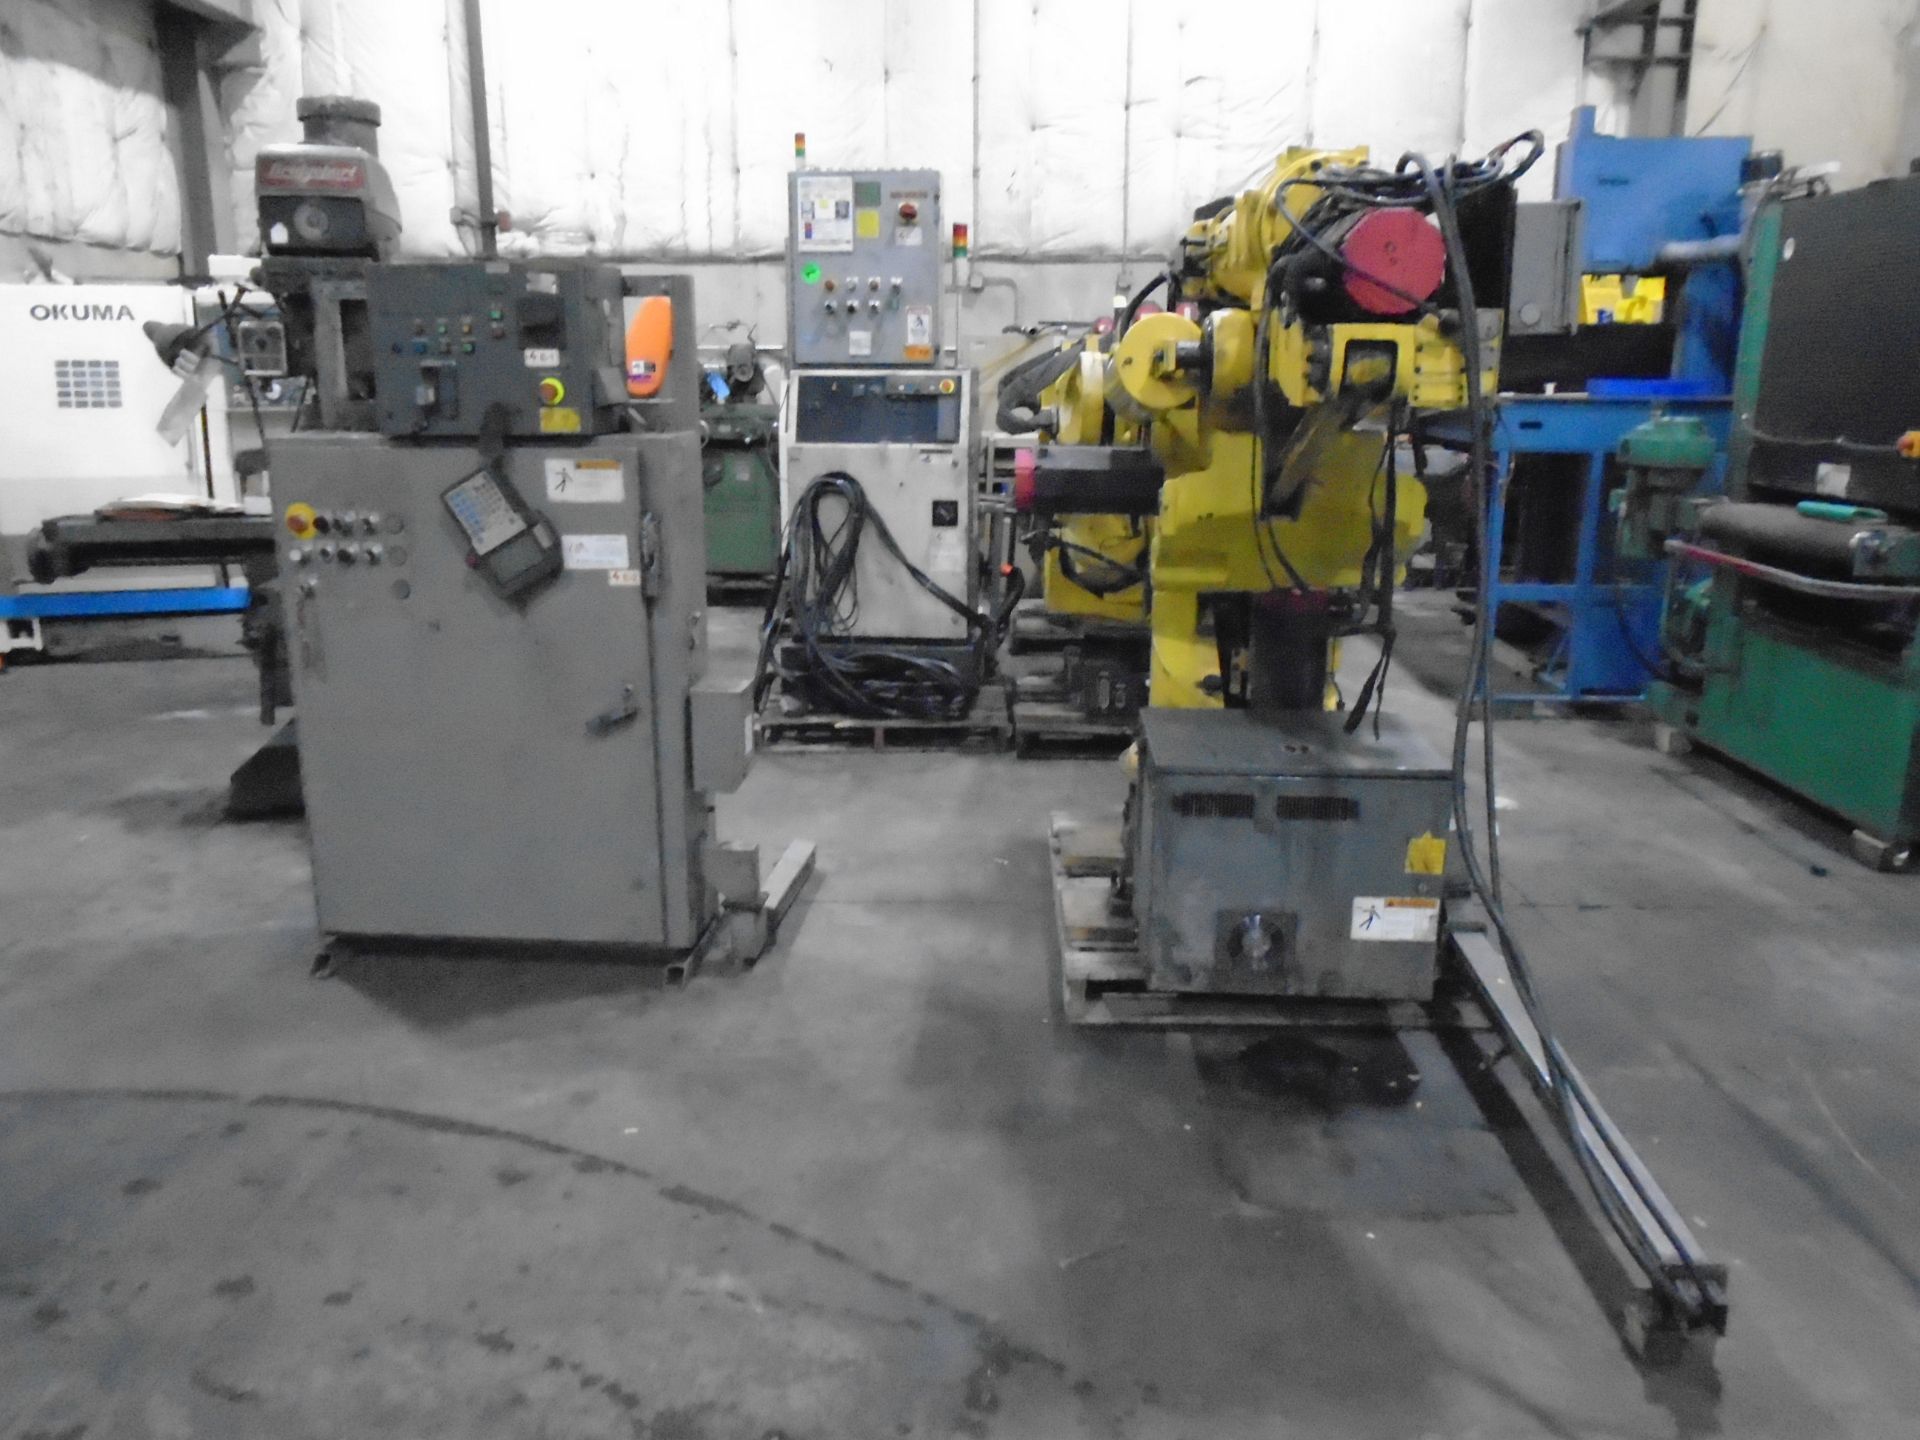 Fanuc S420iF 6 Axis Robot 140 KG Payload RJ2 Controller With Tech Pendent